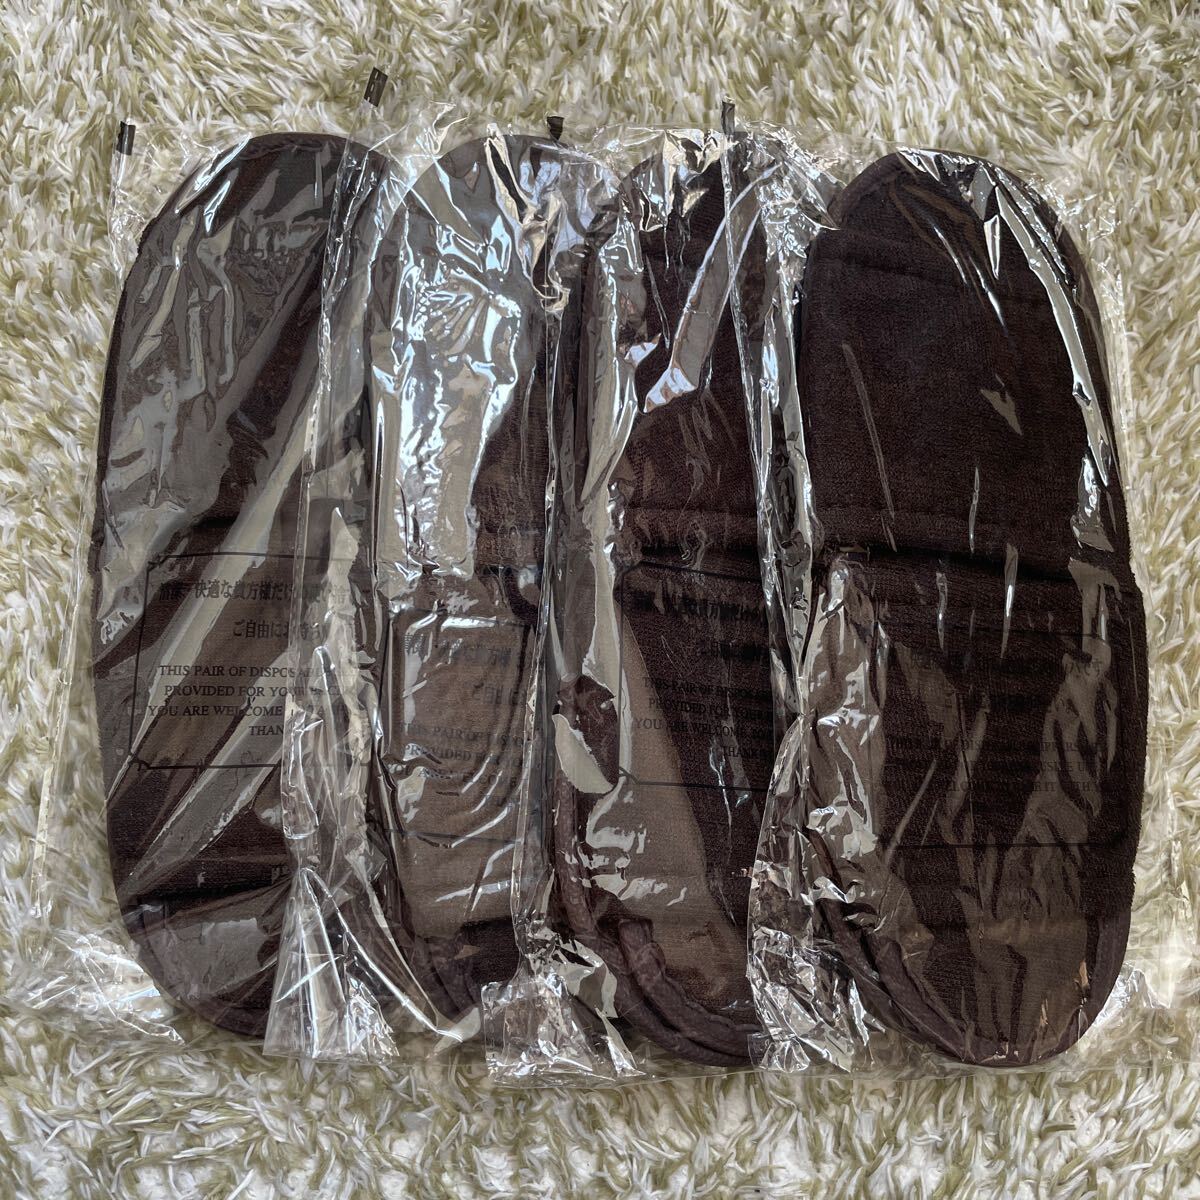  unopened disposable slippers 4 pair Brown hotel amenity slippers 